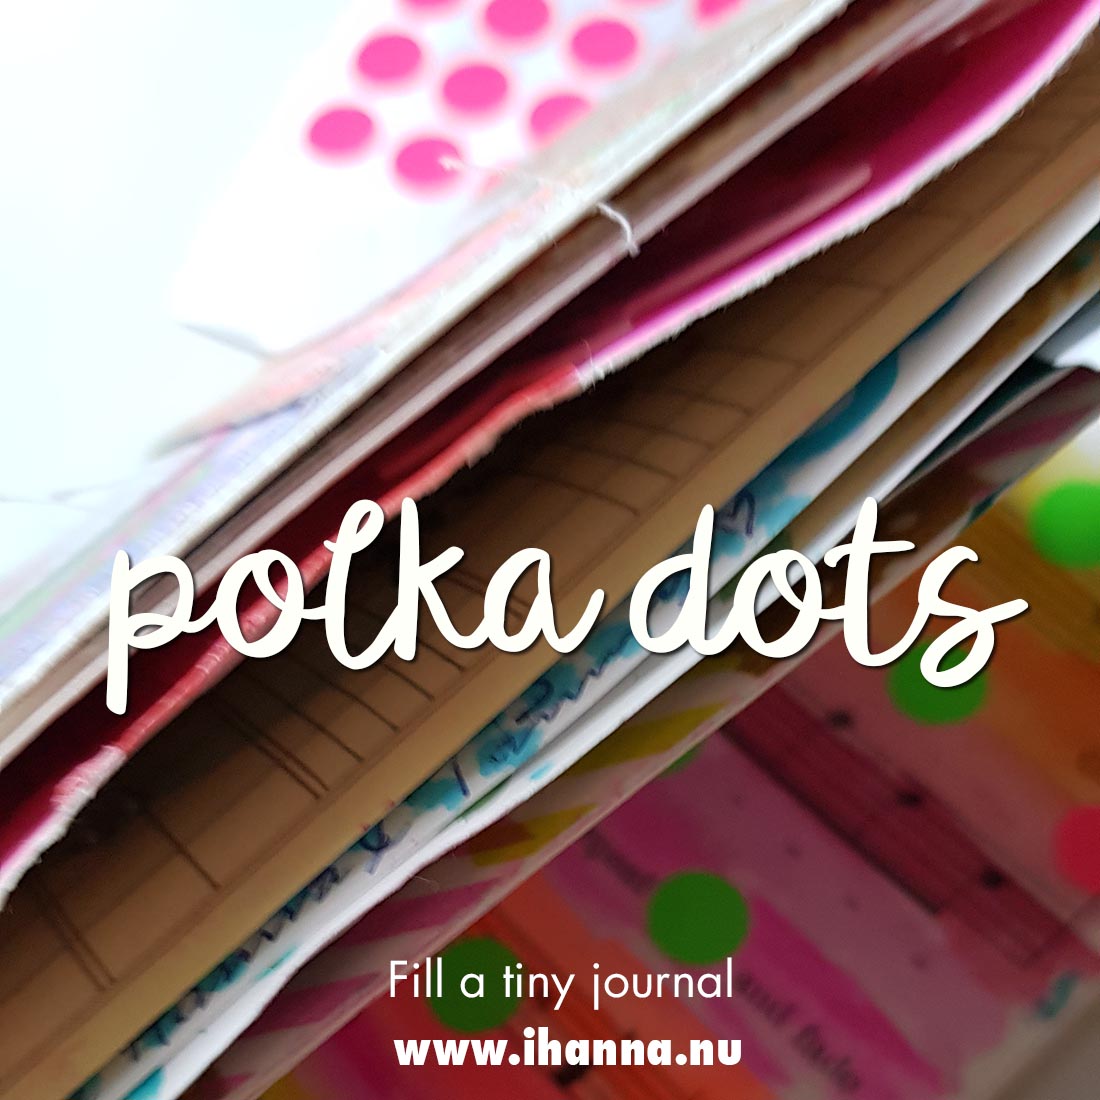 our last prompt for Fill a tiny journal is polka dots #fillatinyjournal